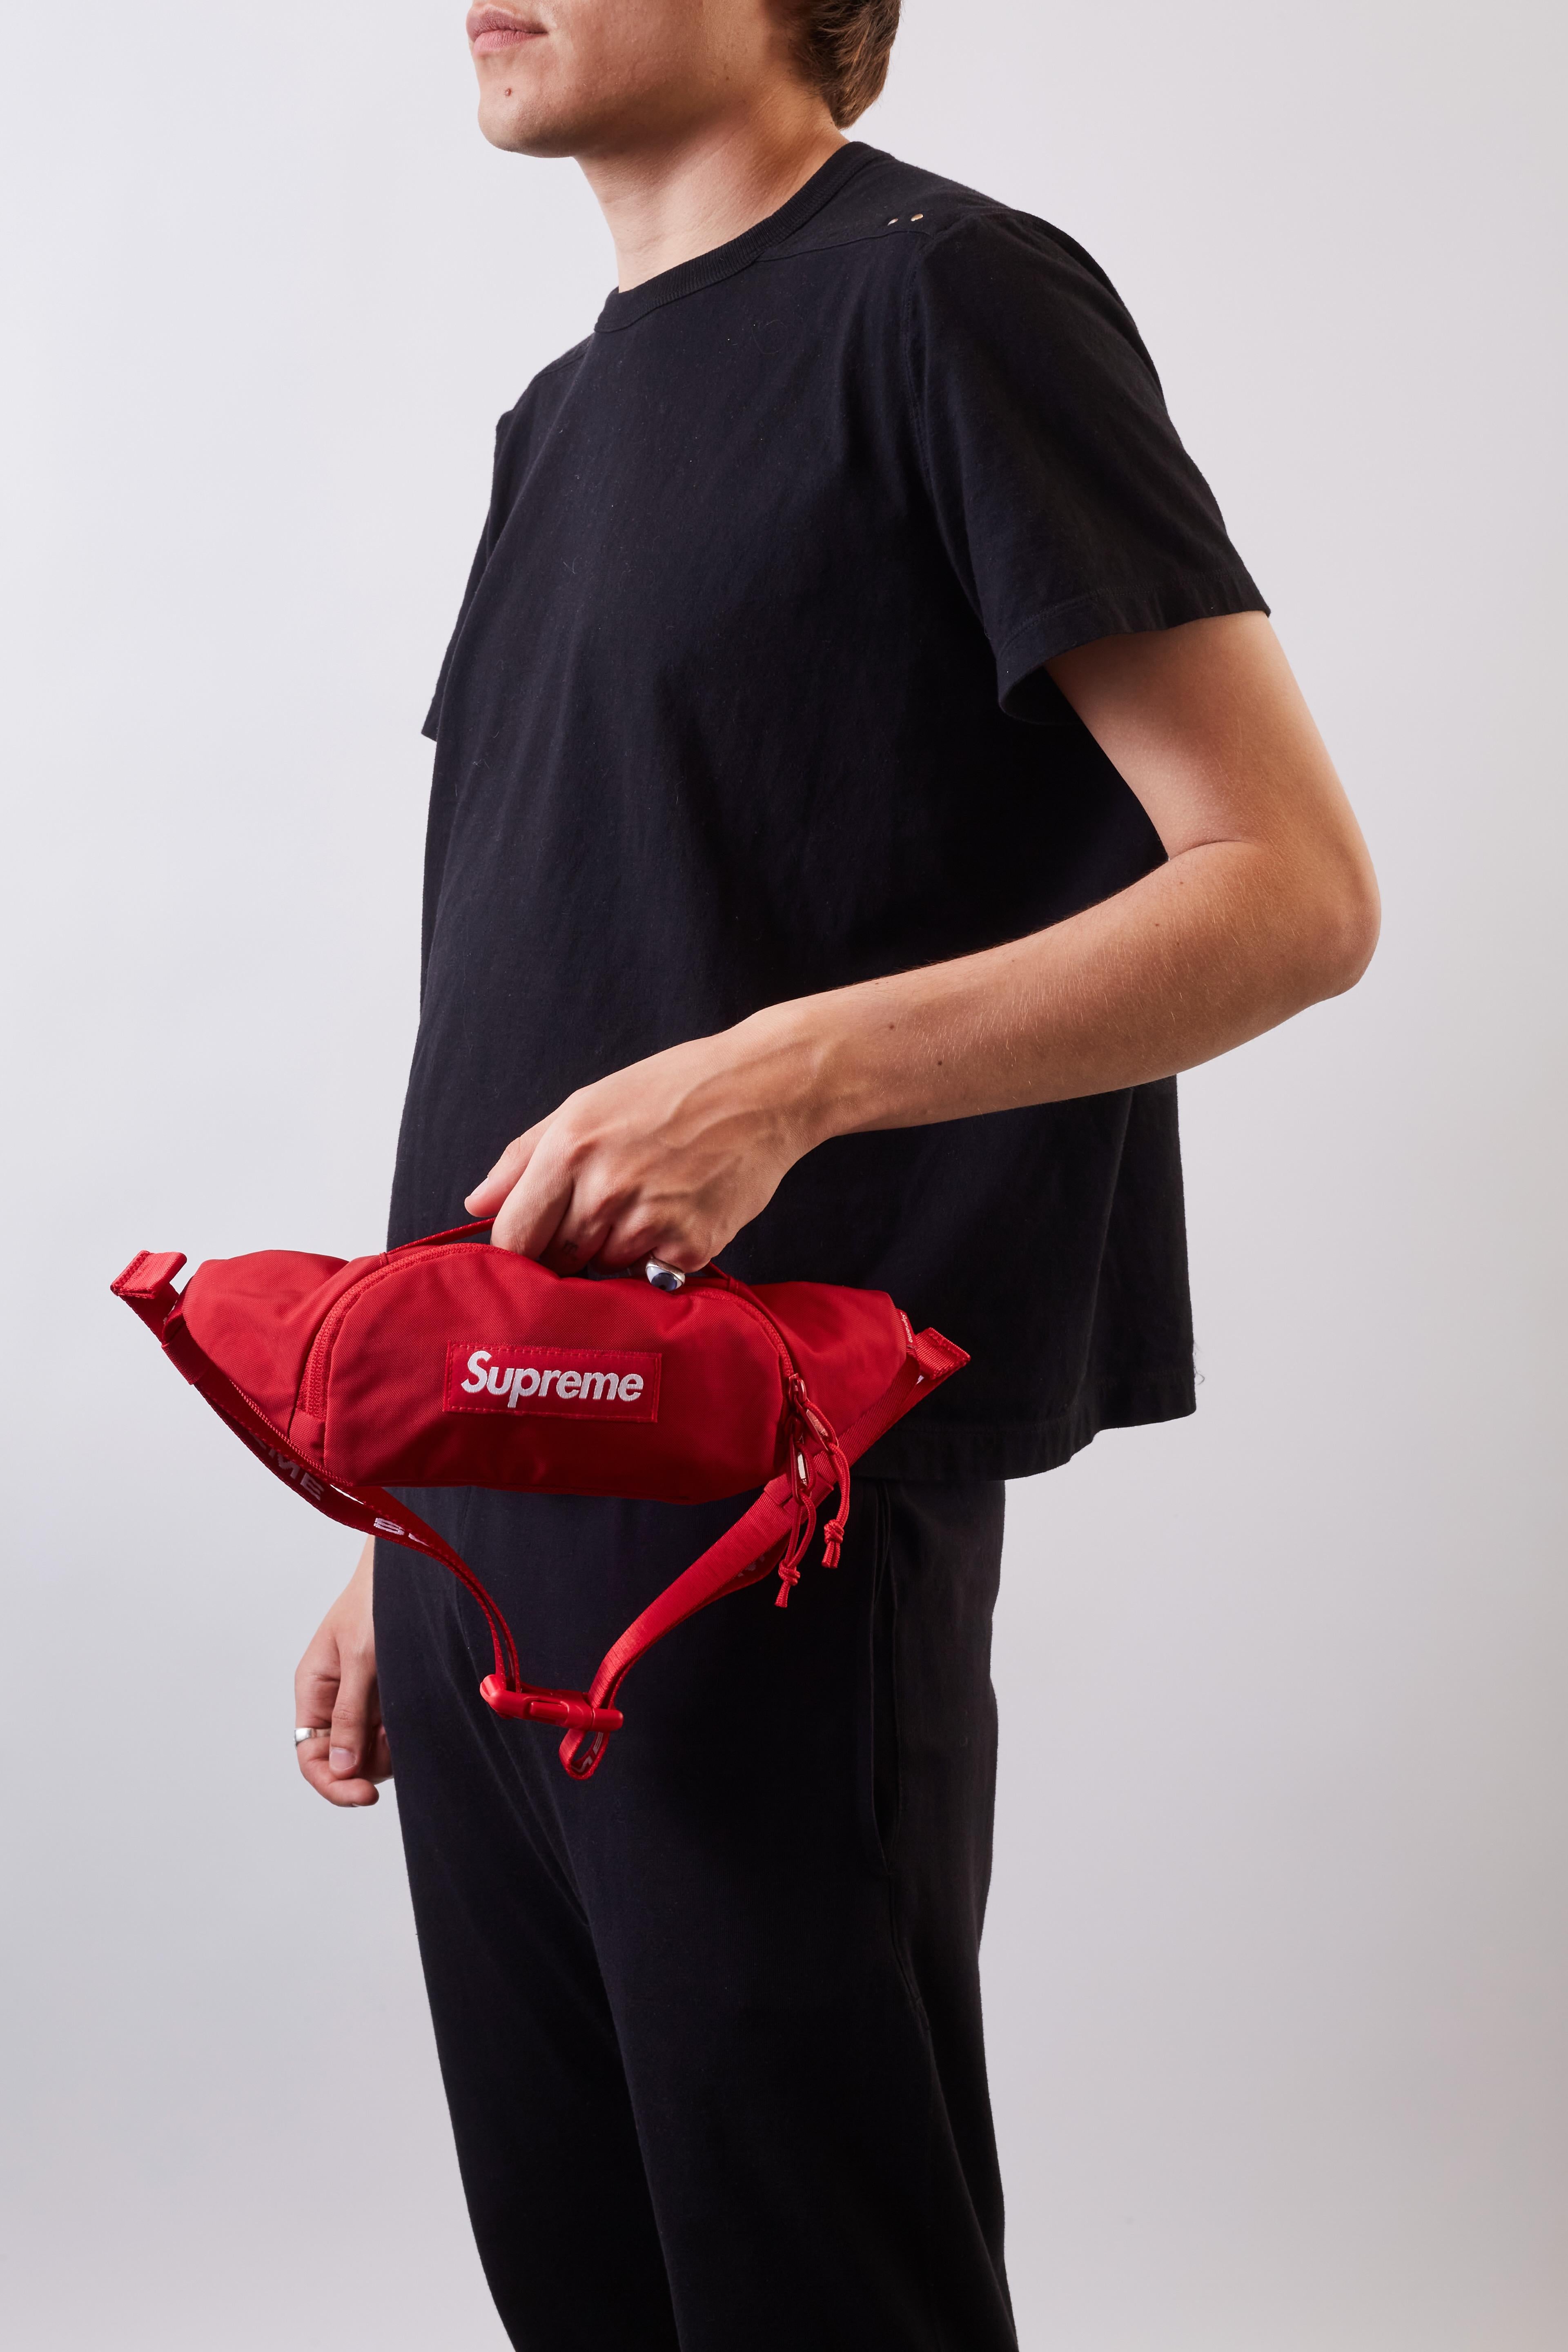 Supreme is back with its iconic streetwear staples for summer. This red-coloured small waist bag has a water-resistant construction divided into two compartments - one with a zipper and the other, on the inside, features a touch strap. A signature